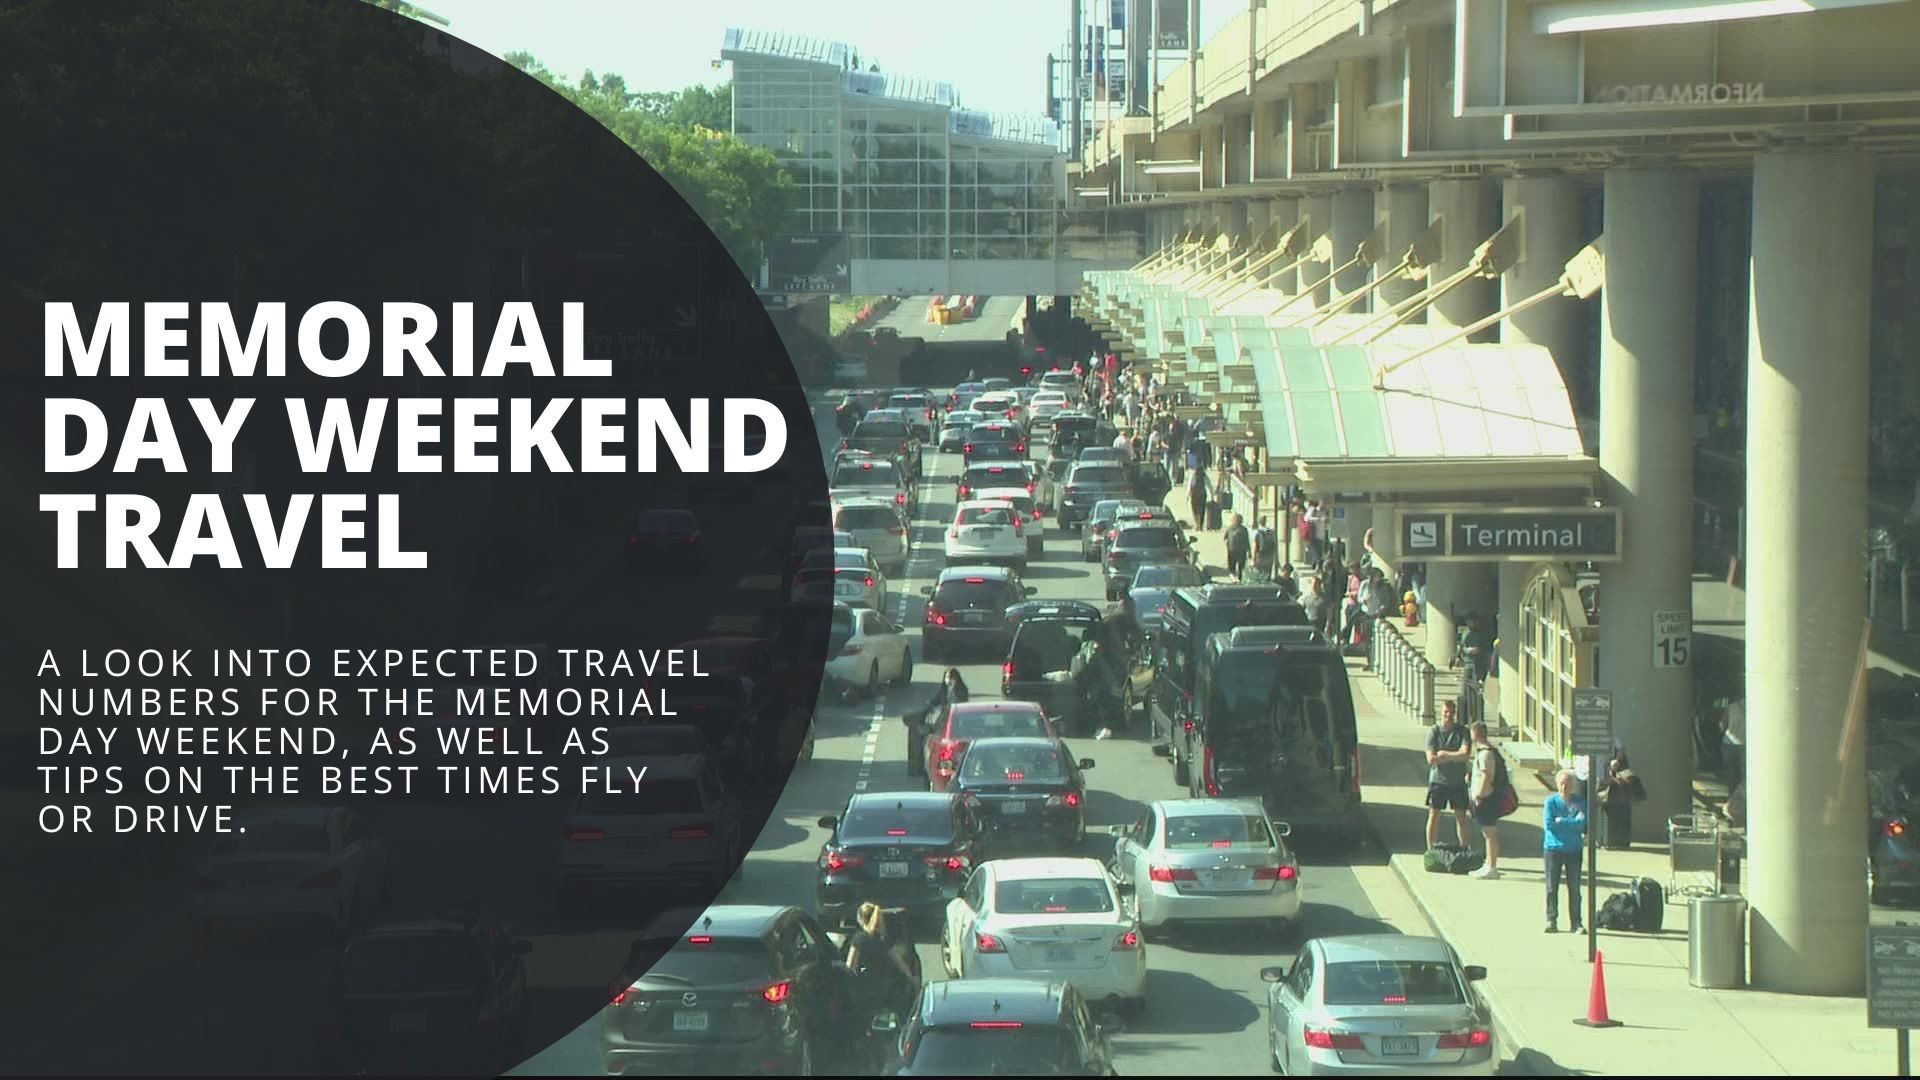 A look into expected travel numbers for the Memorial Day weekend, as well as tips on the best times fly or drive.